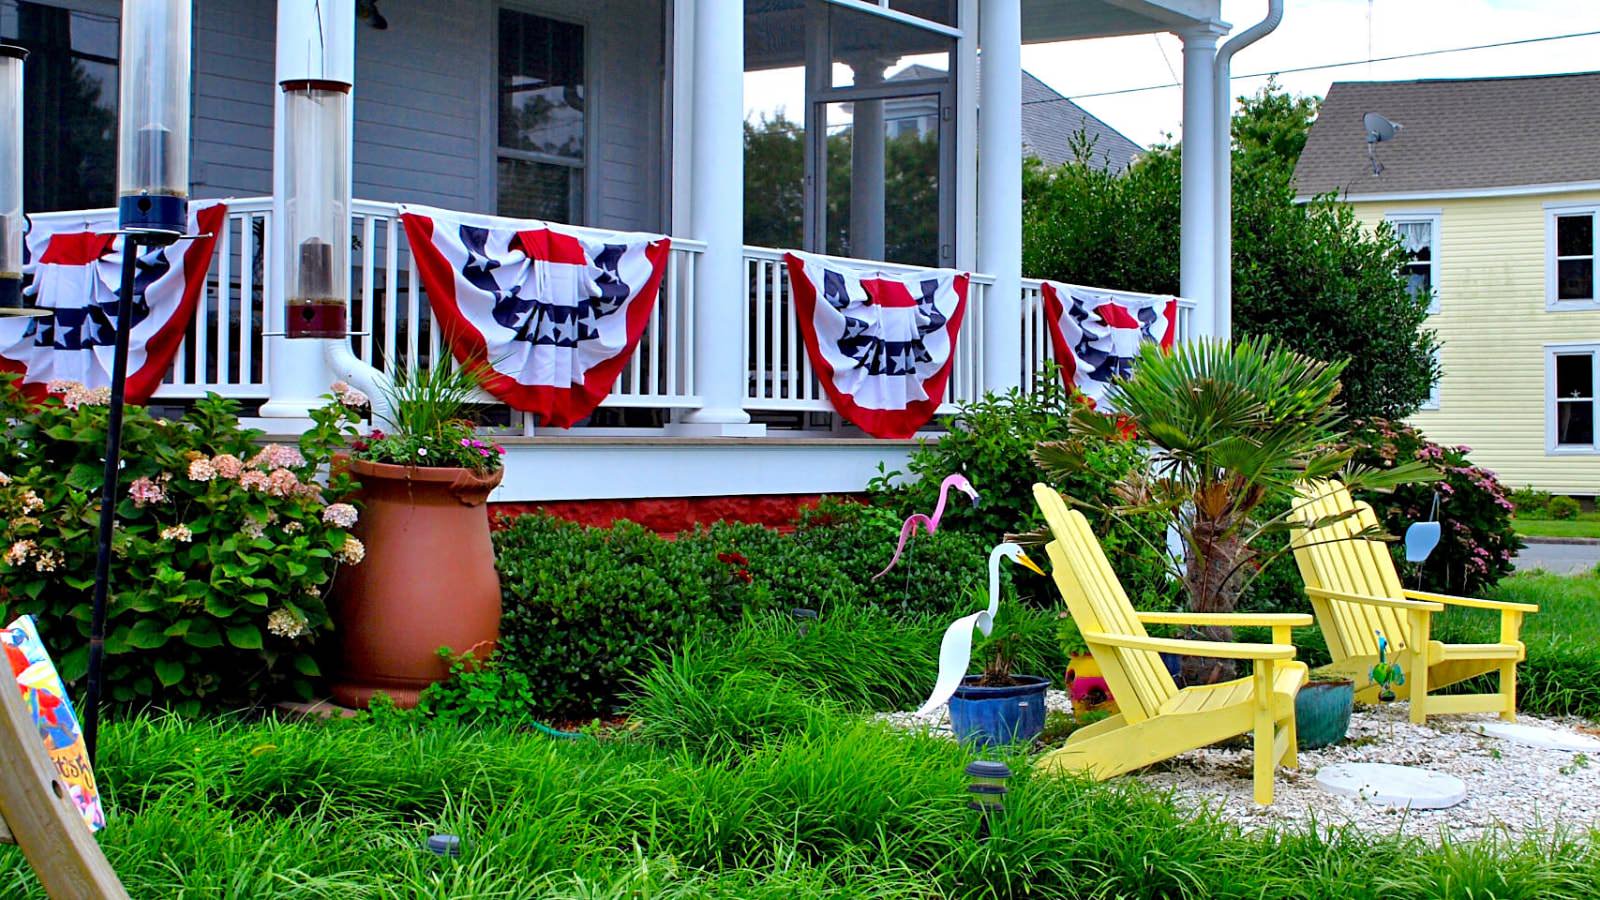 Exterior view of property's front porch with white columns and Independence Day flags on the railing, green bushes, green grass, and yellow Adirondack chairs on white gravel patio area